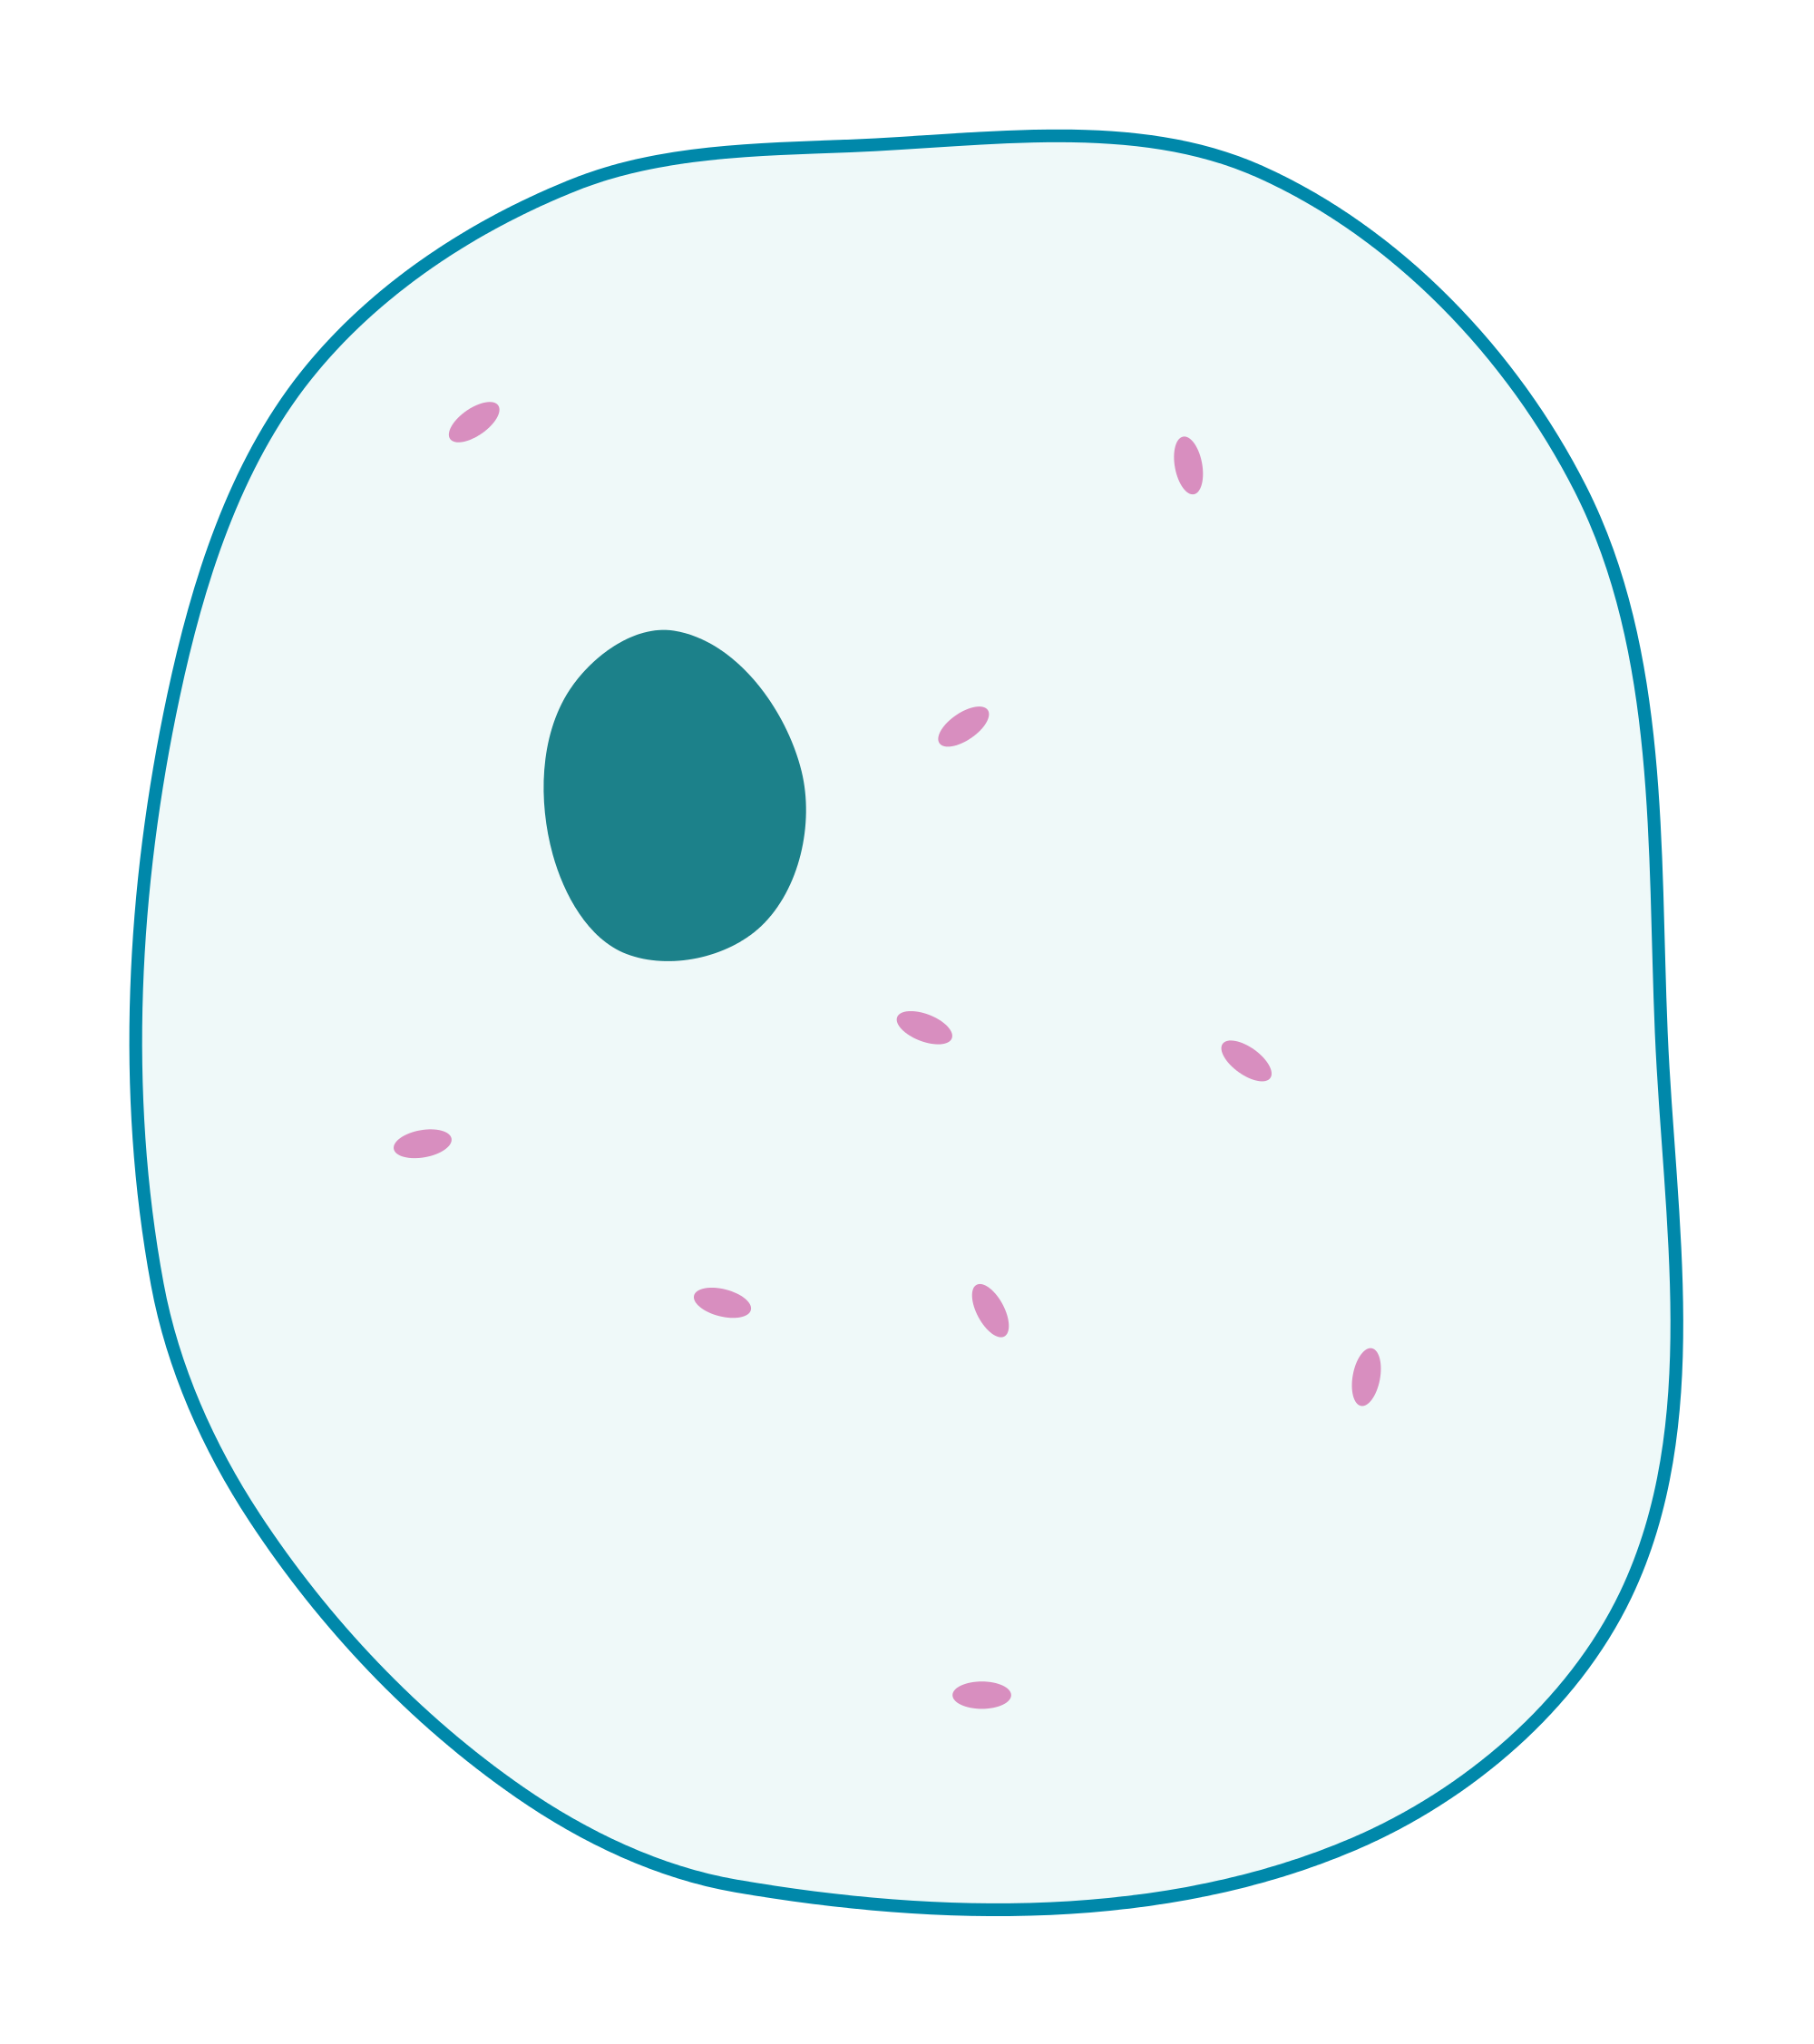 File:Simple diagram of animal cell (blank).svg